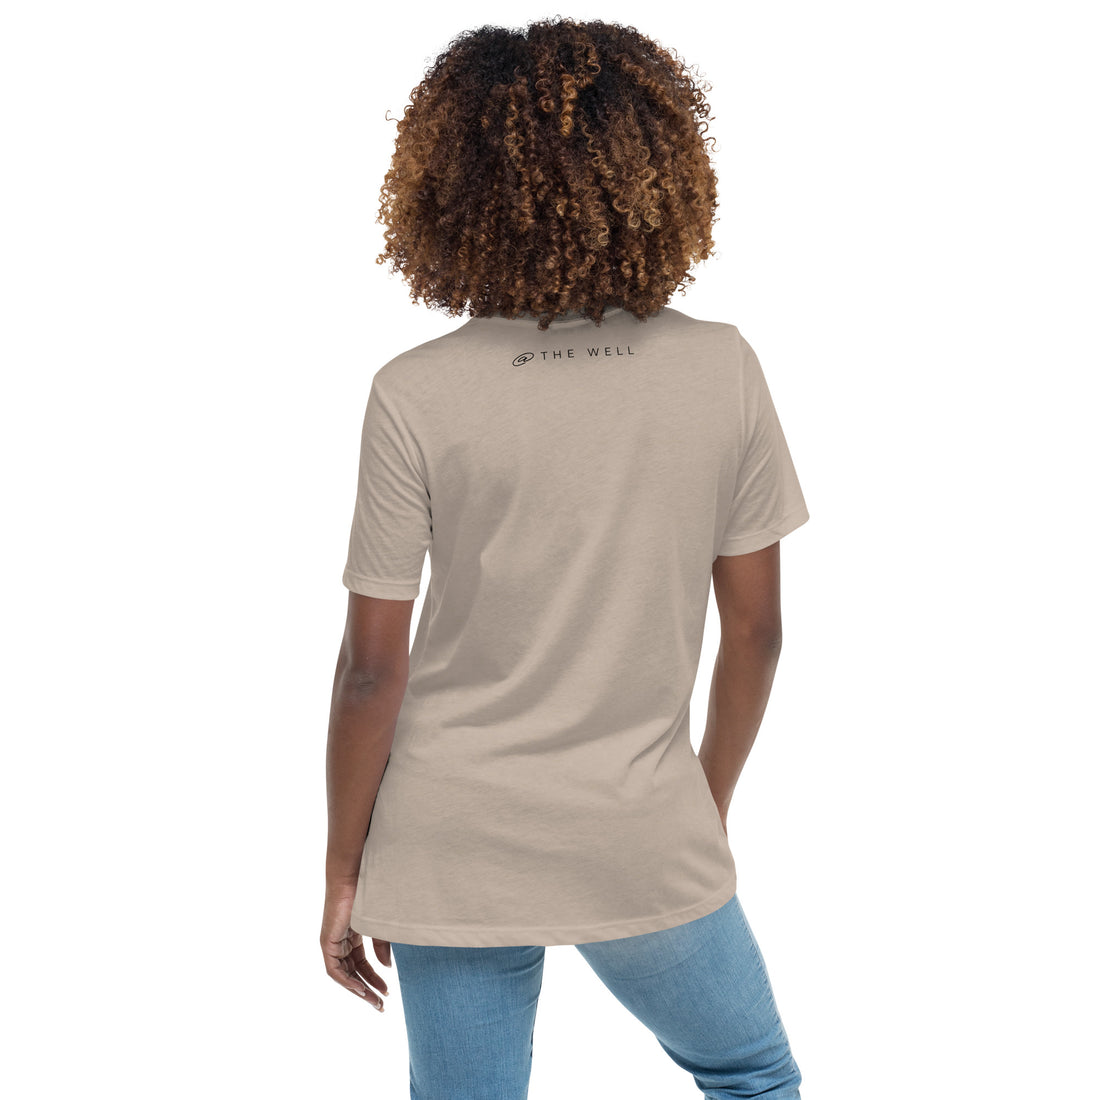 Never Thirst Again Women's Relaxed T-Shirt